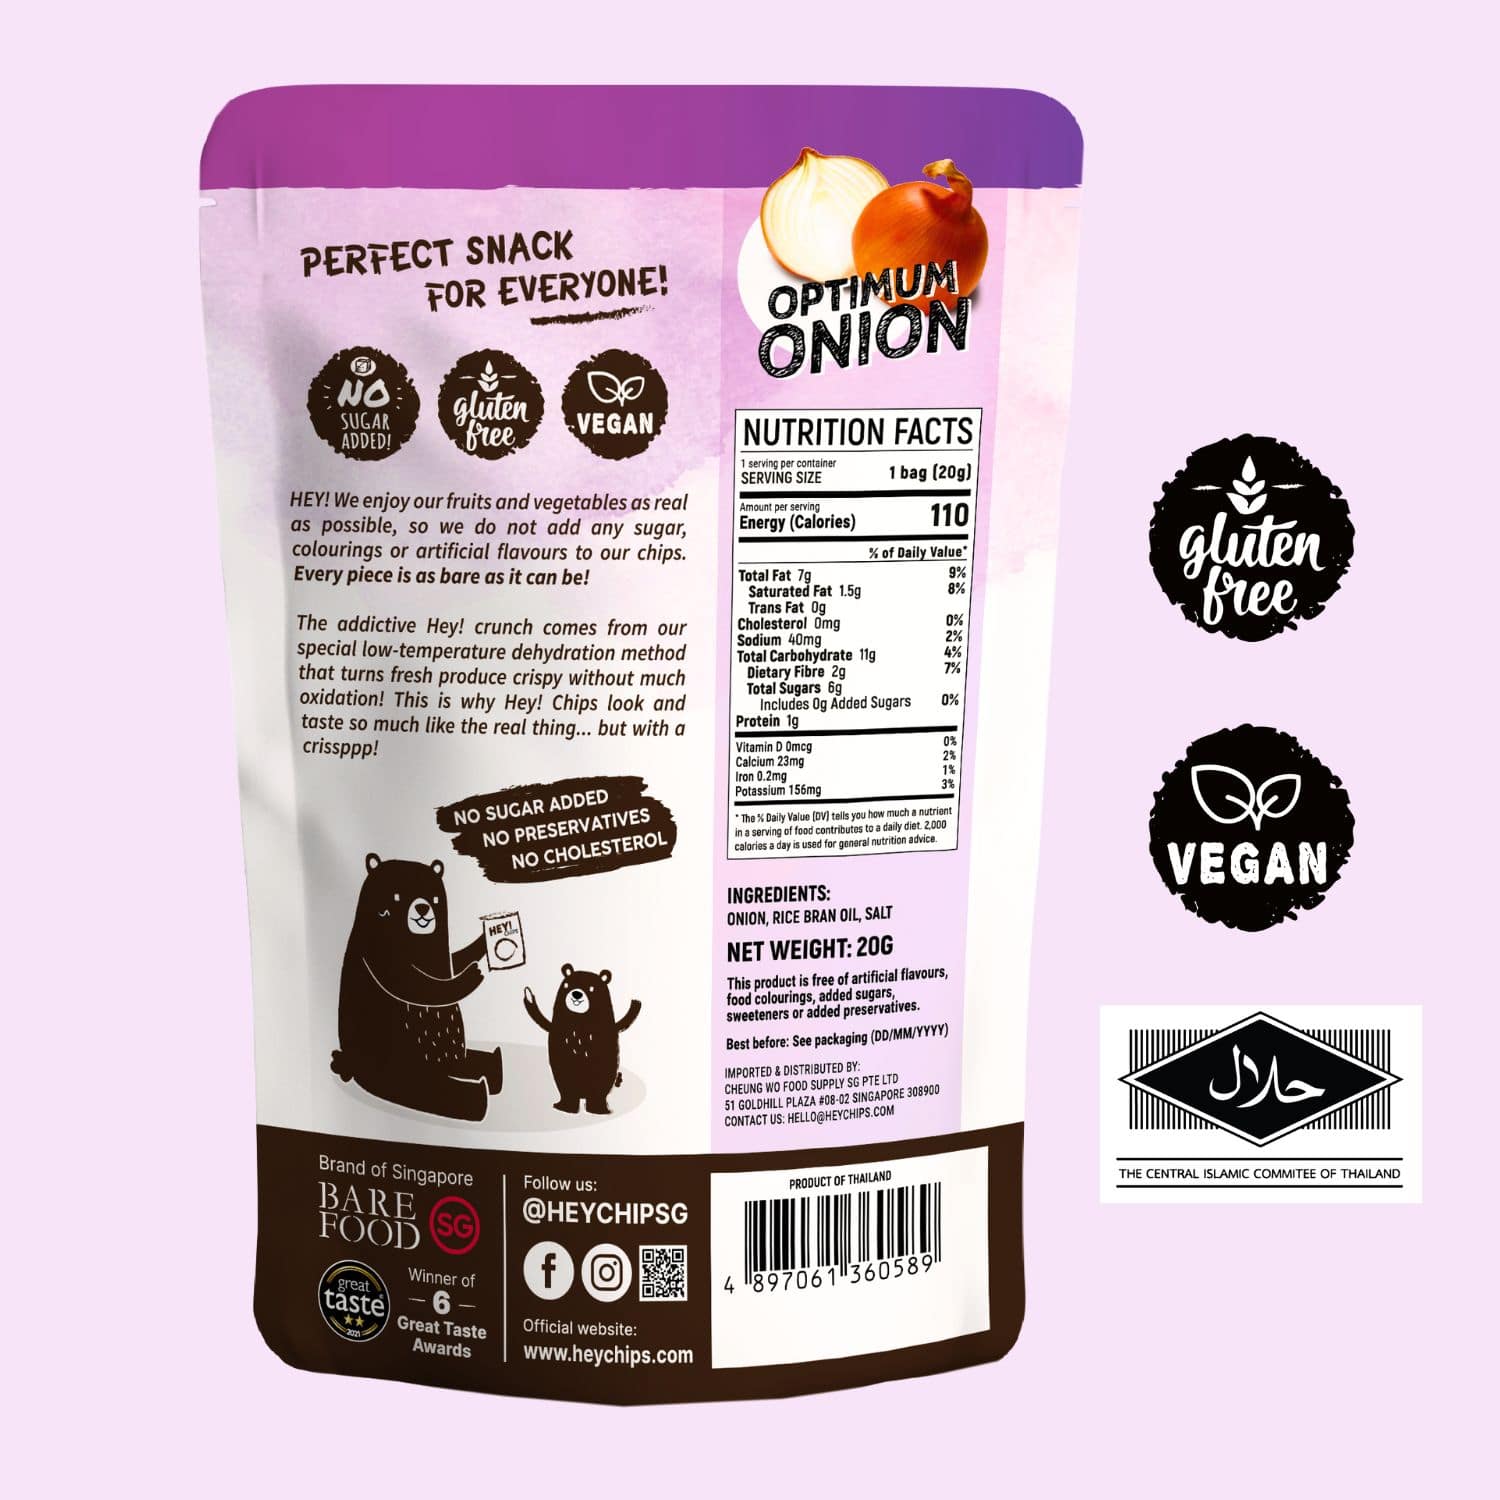 100% Natural Hey! Chips Onion which is Gluten-Free, Halal-Certified, Vegetarian, Vegan, Dairy-free